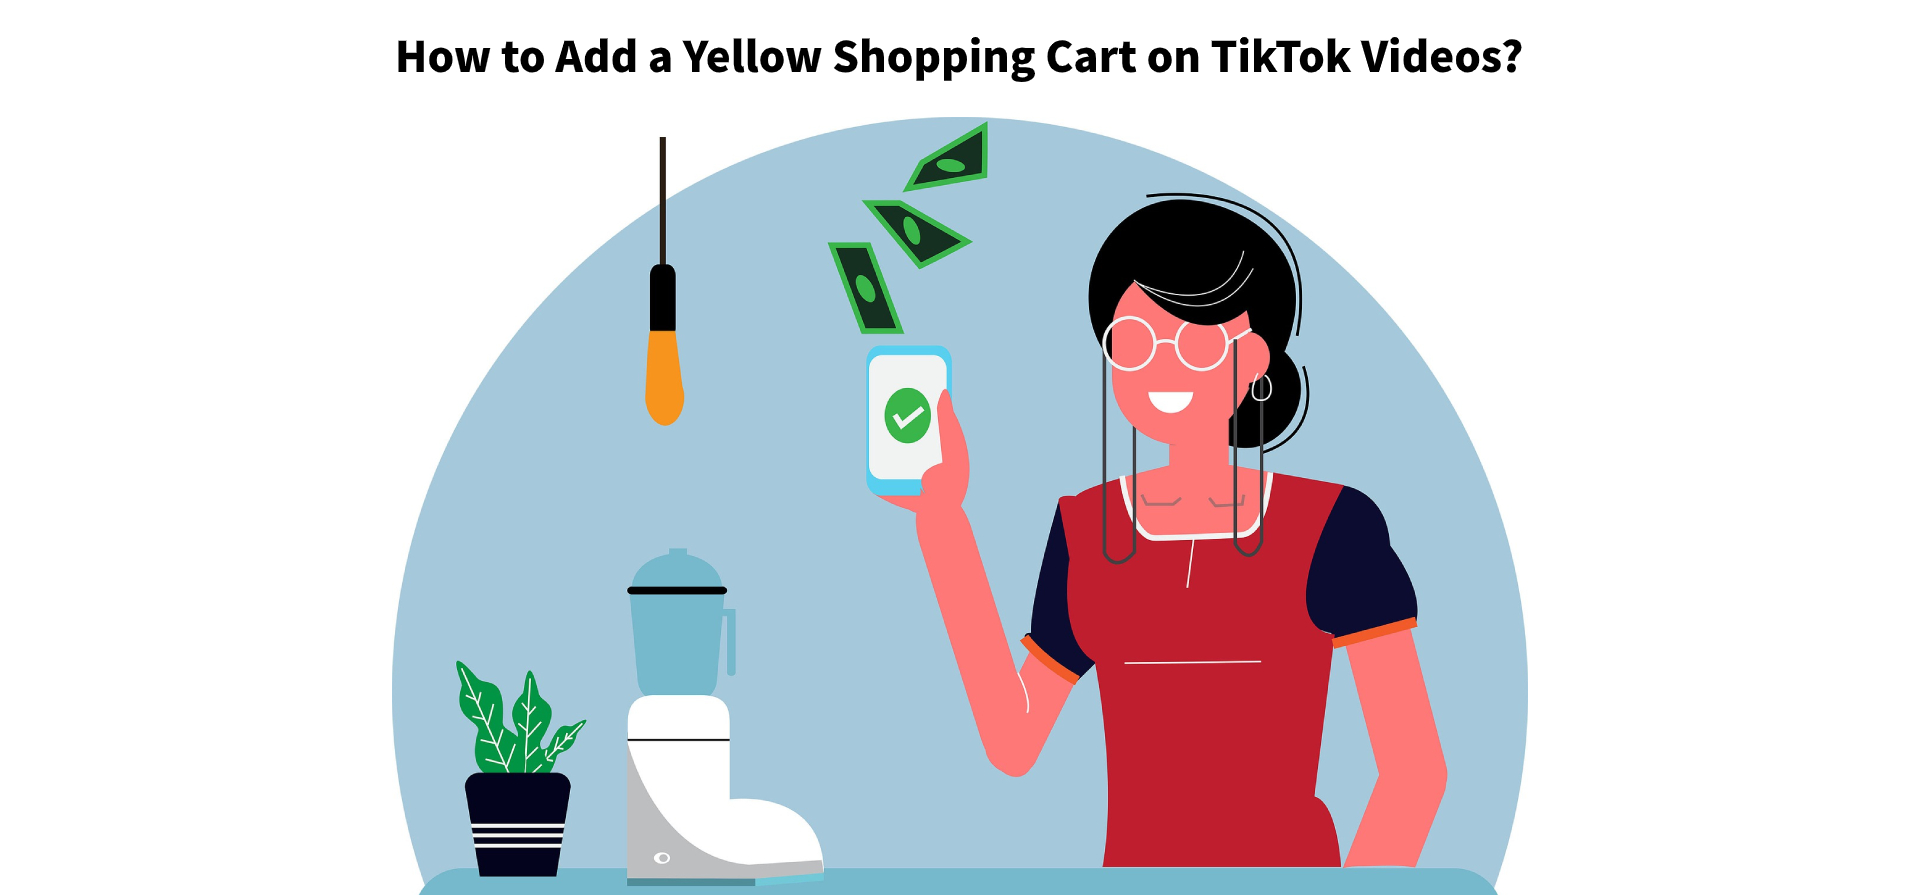 How to Add a Yellow Shopping Cart on TikTok Videos?